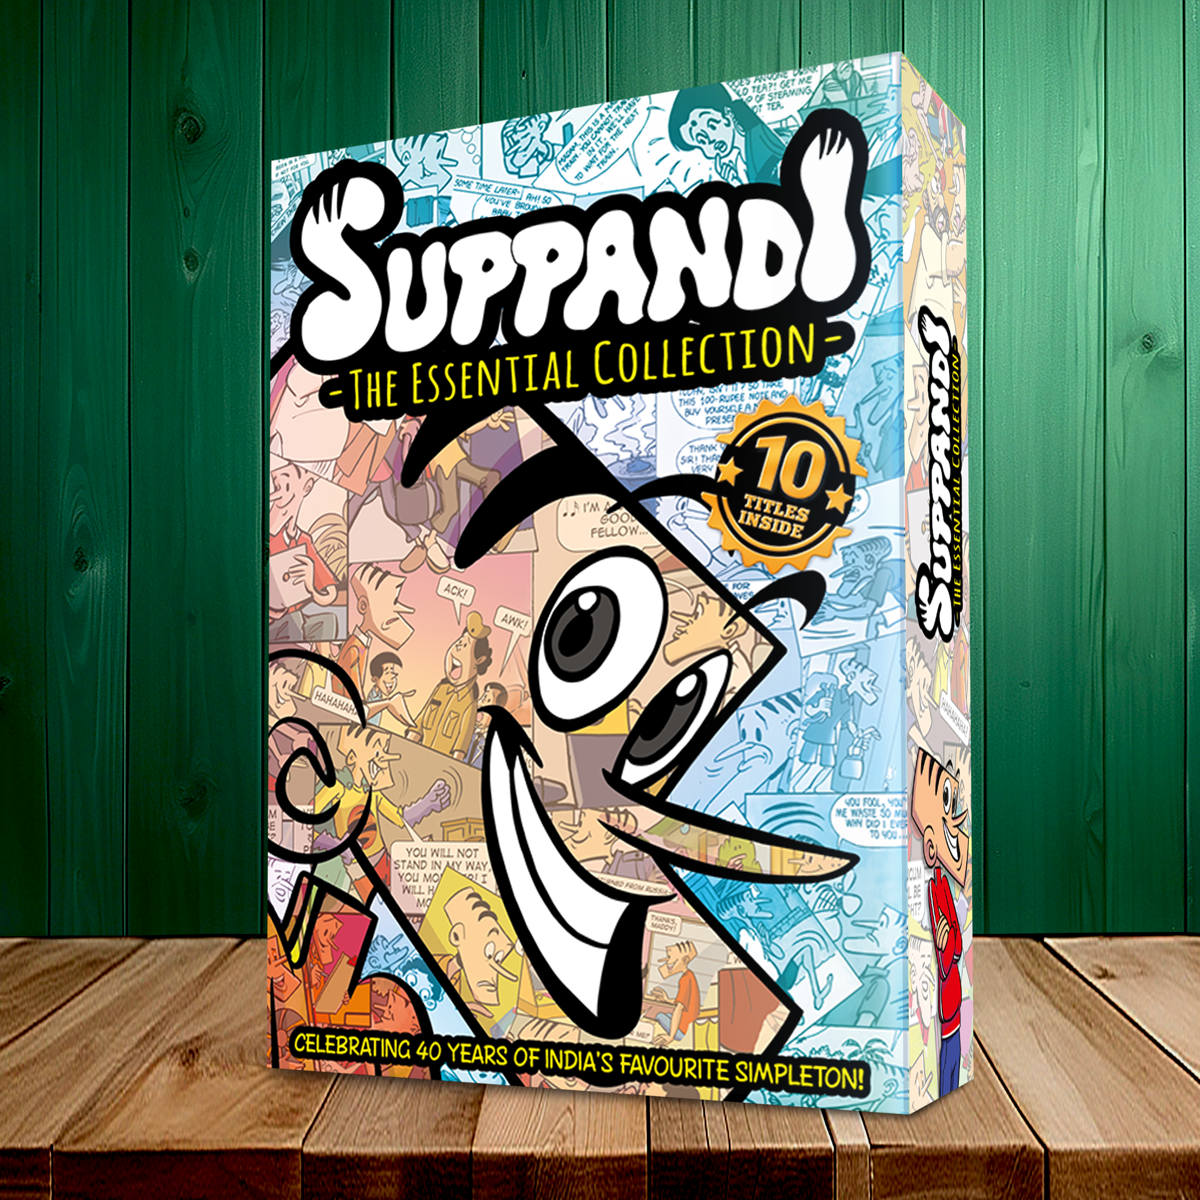 Suppandi: The Essential Collection